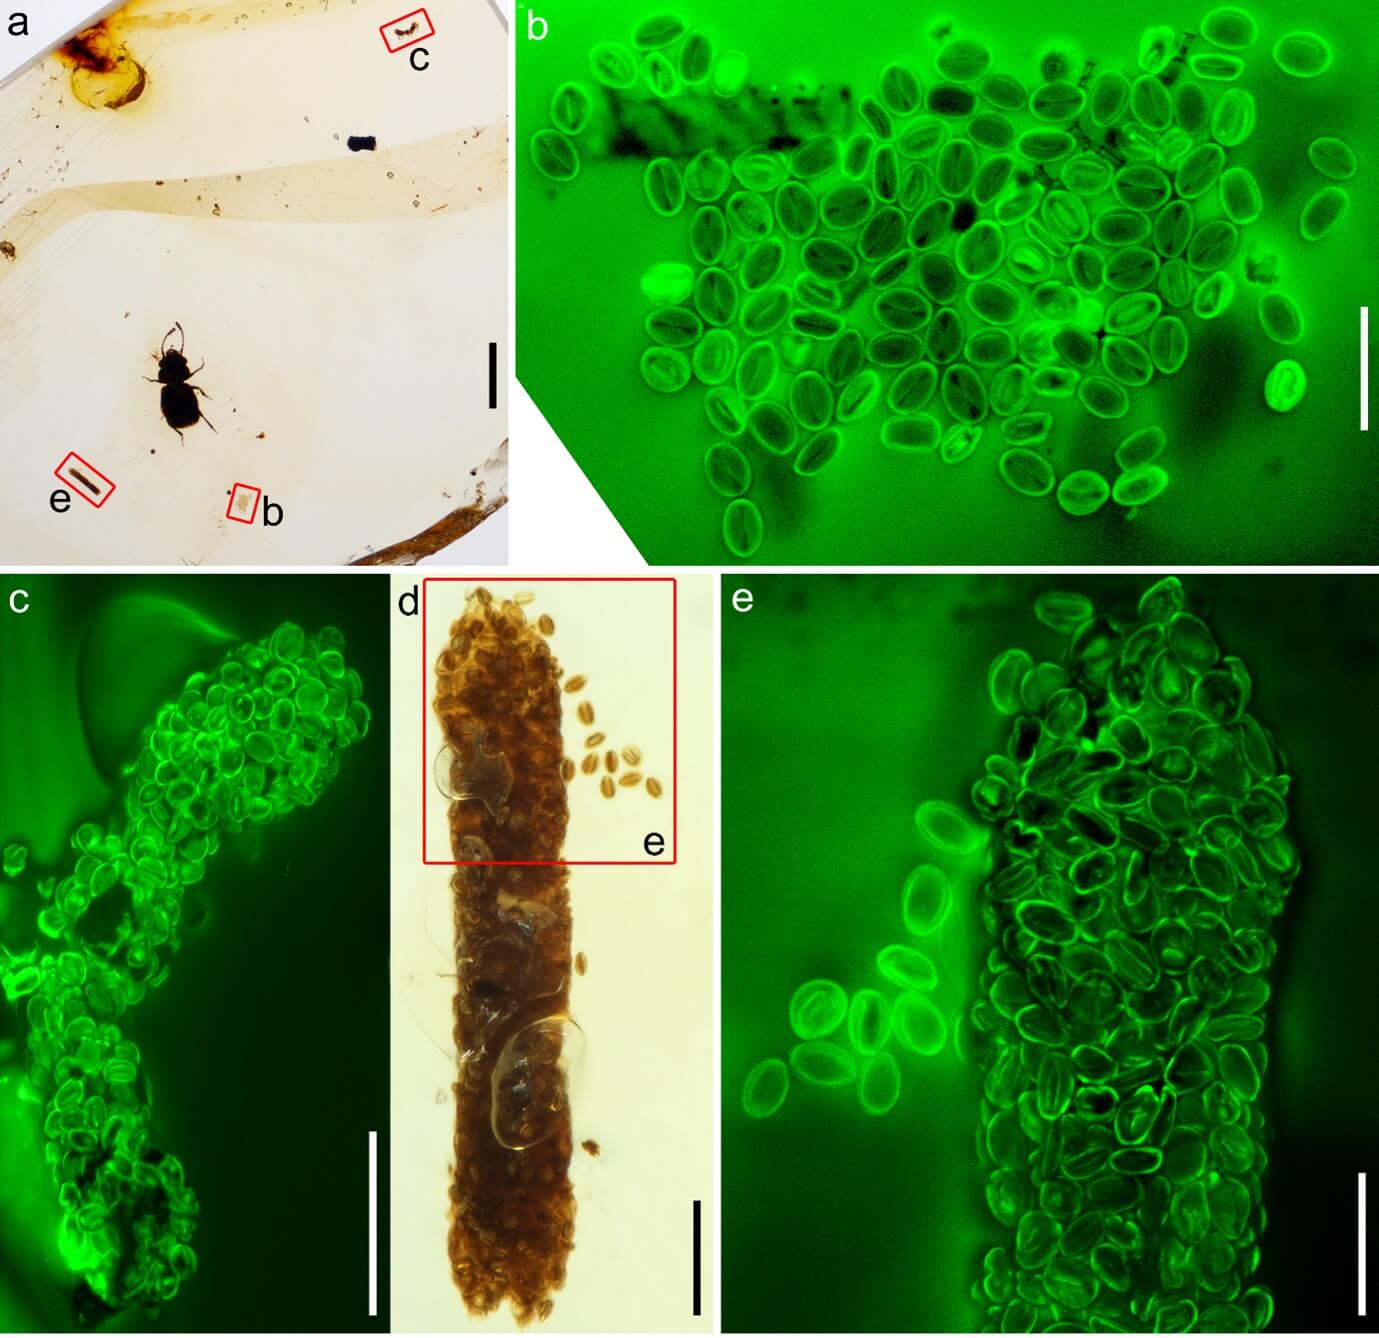 Aggregations of eudicot pollen and pollen-containing coprolites associated with pelretes vivificus. A, amber piece with p. Vivificus, showing coprolites and one pollen aggregation. B-e, details of pollen under visible light (d) and confocal laser scanning microscopy